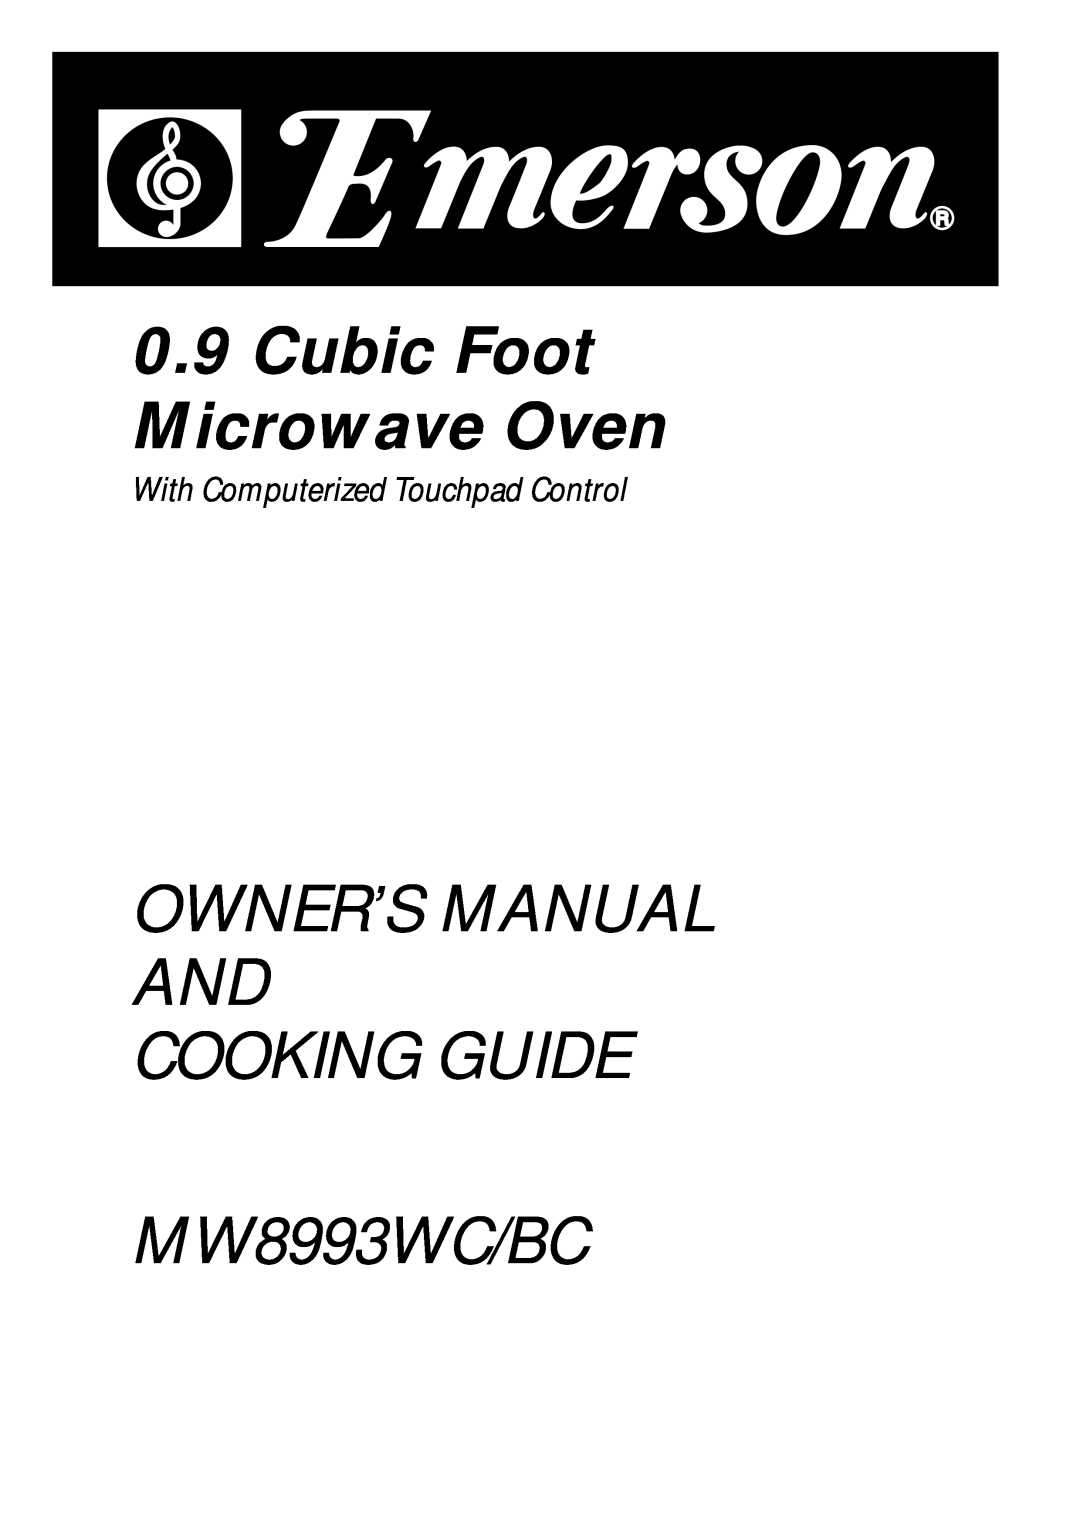 Emerson MW8993WC/BC owner manual Cubic Foot Microwave Oven, Owner’S Manual And Cooking Guide 